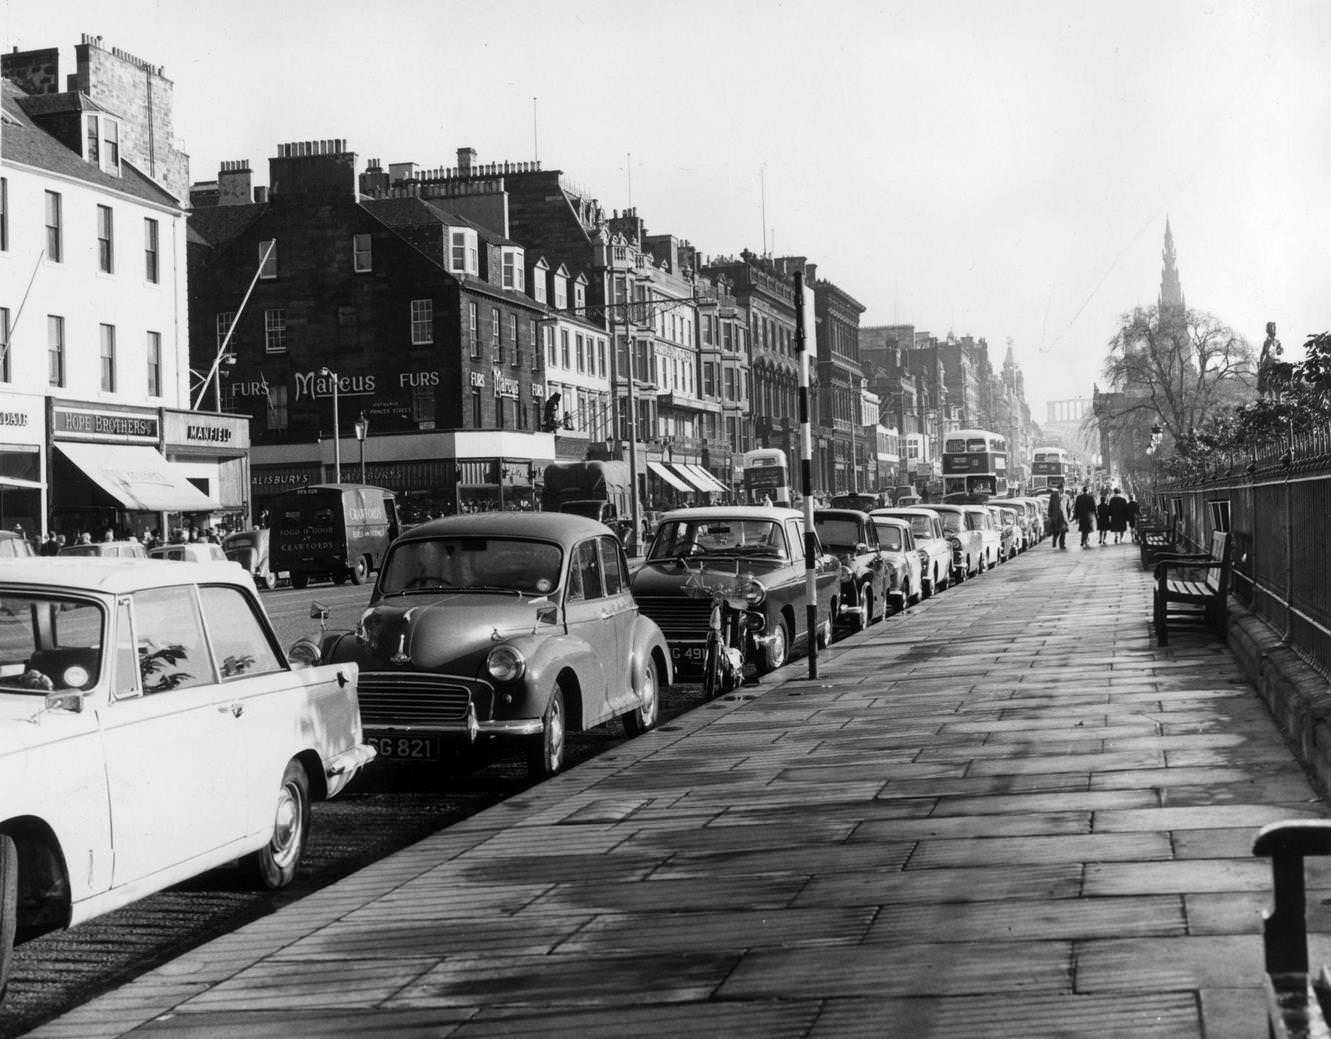 Princes Street, Edinburgh with cars parked at the kerbside, 1963